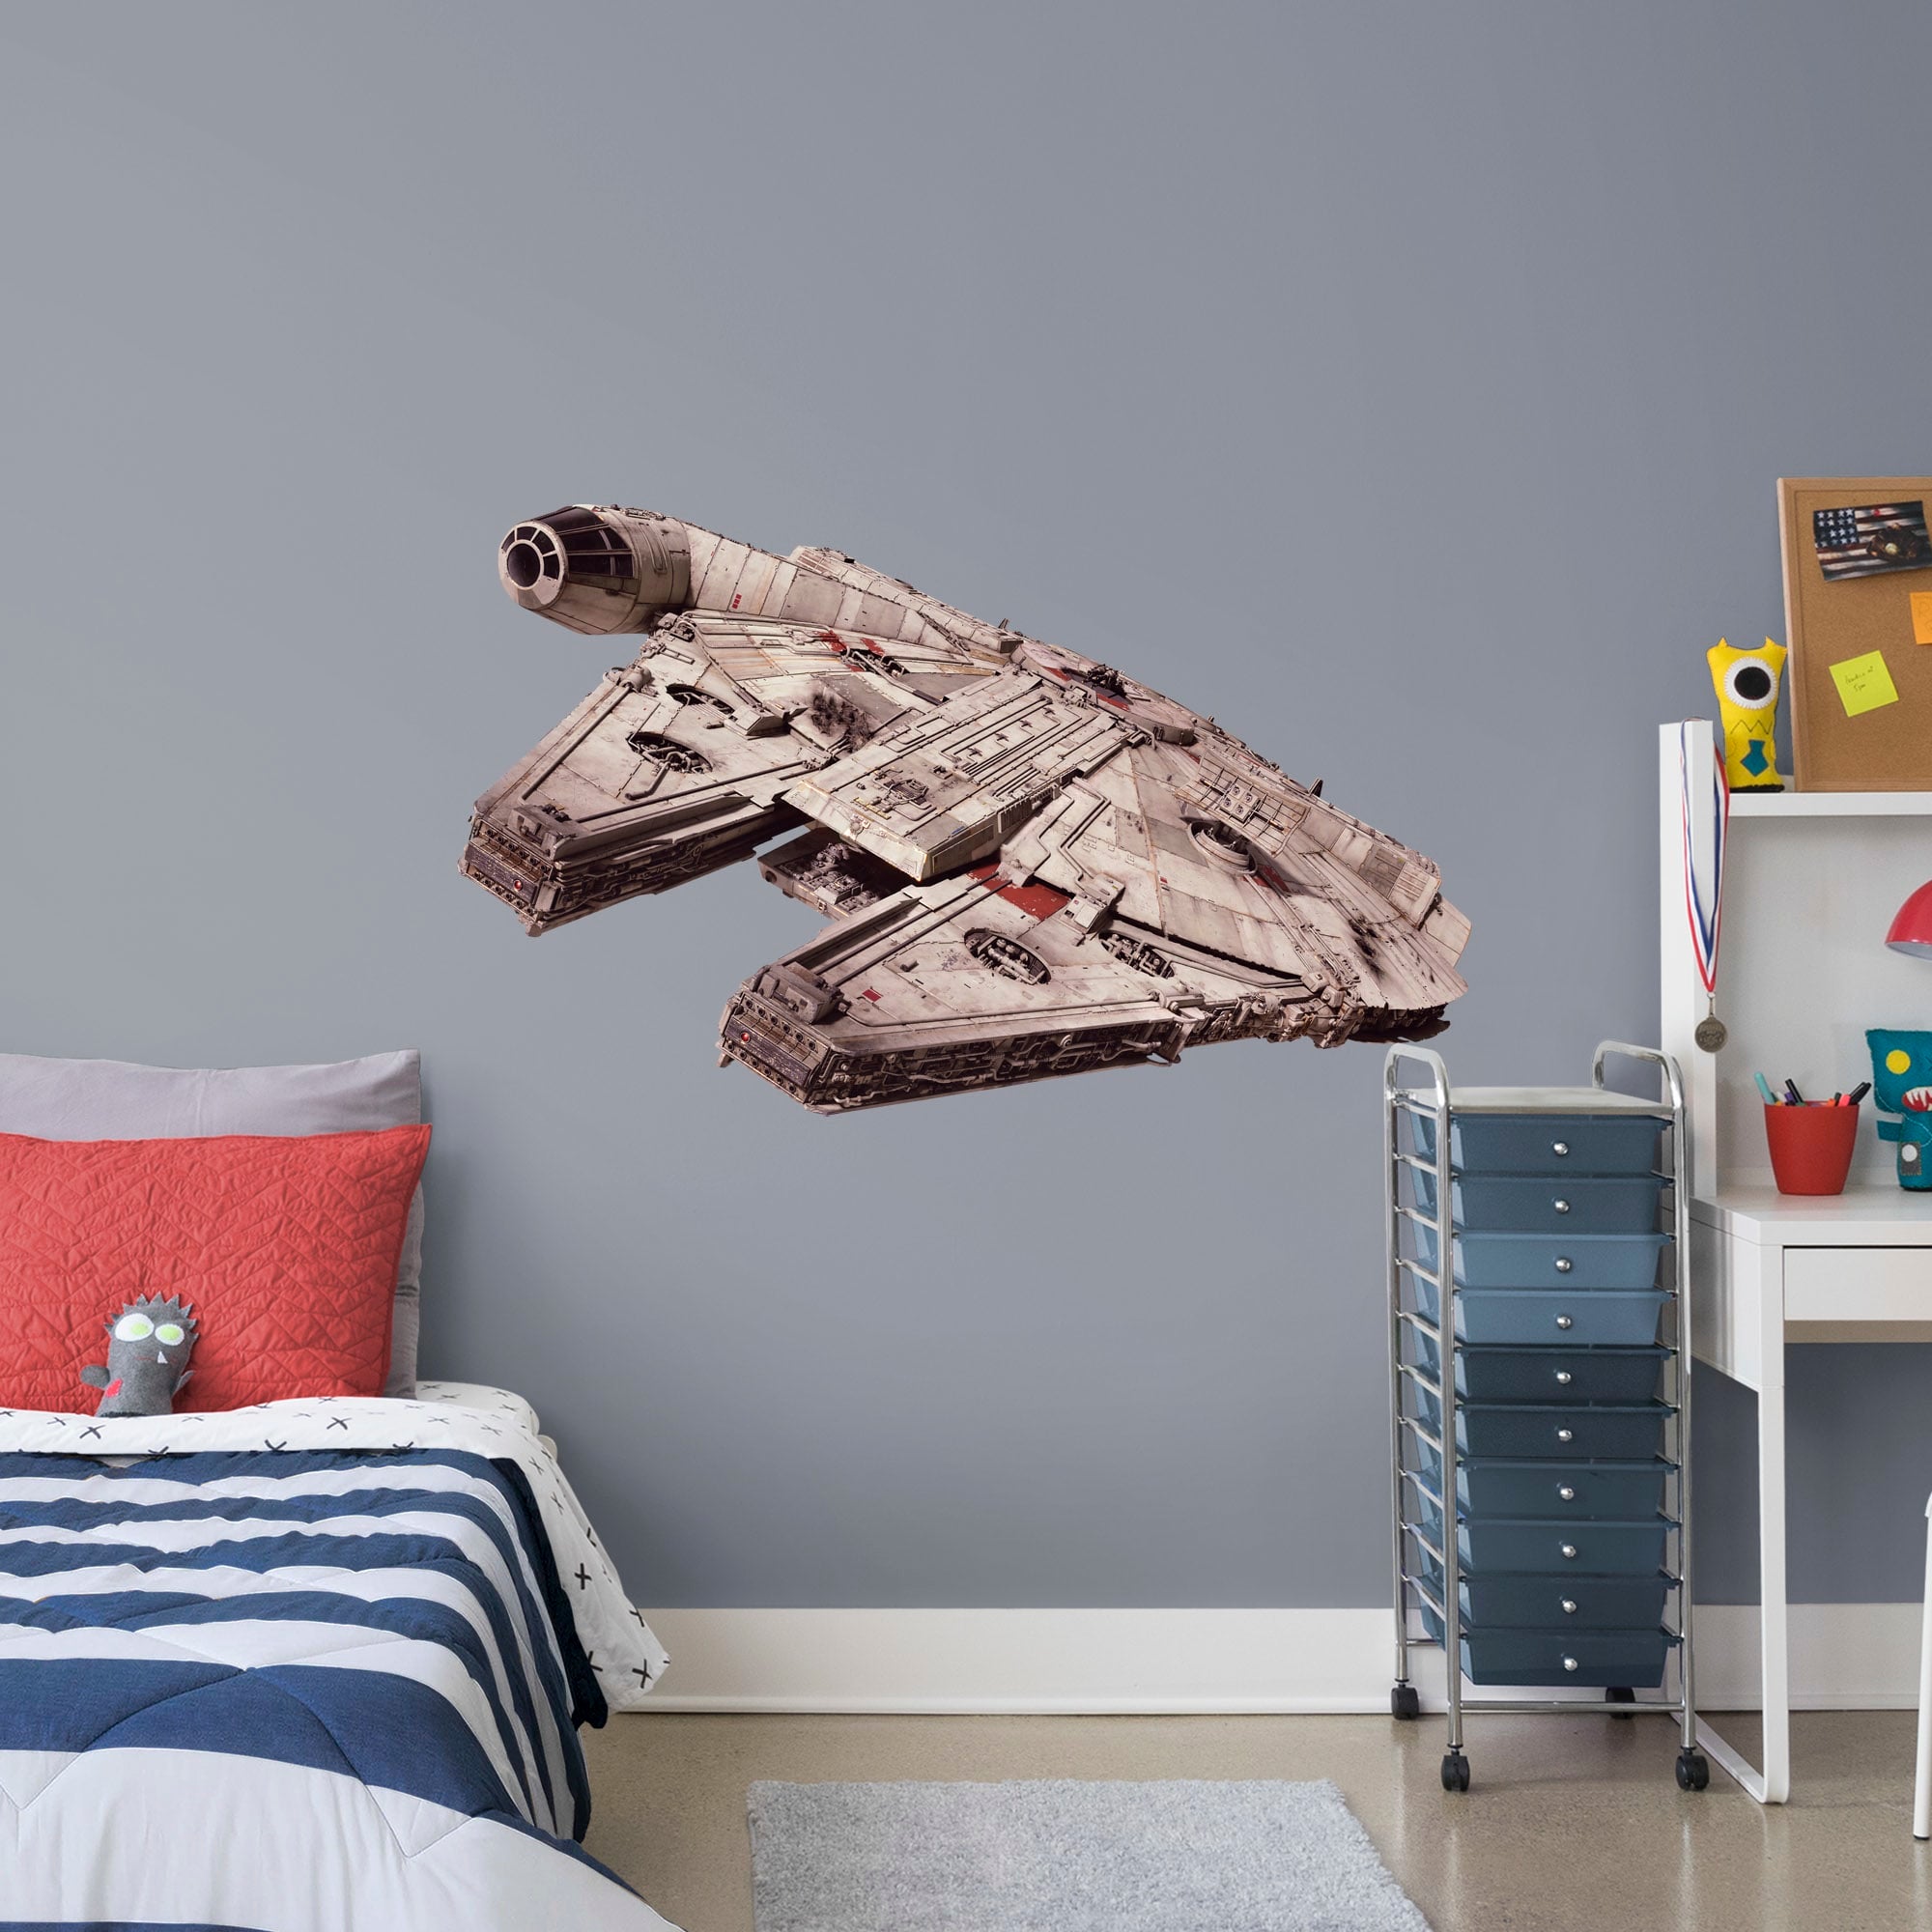 Millennium Falcon - Star Wars: The Force Awakens - Officially Licensed Removable Wall Decal Life-Size Ship + 2 Decals (79"W x 41